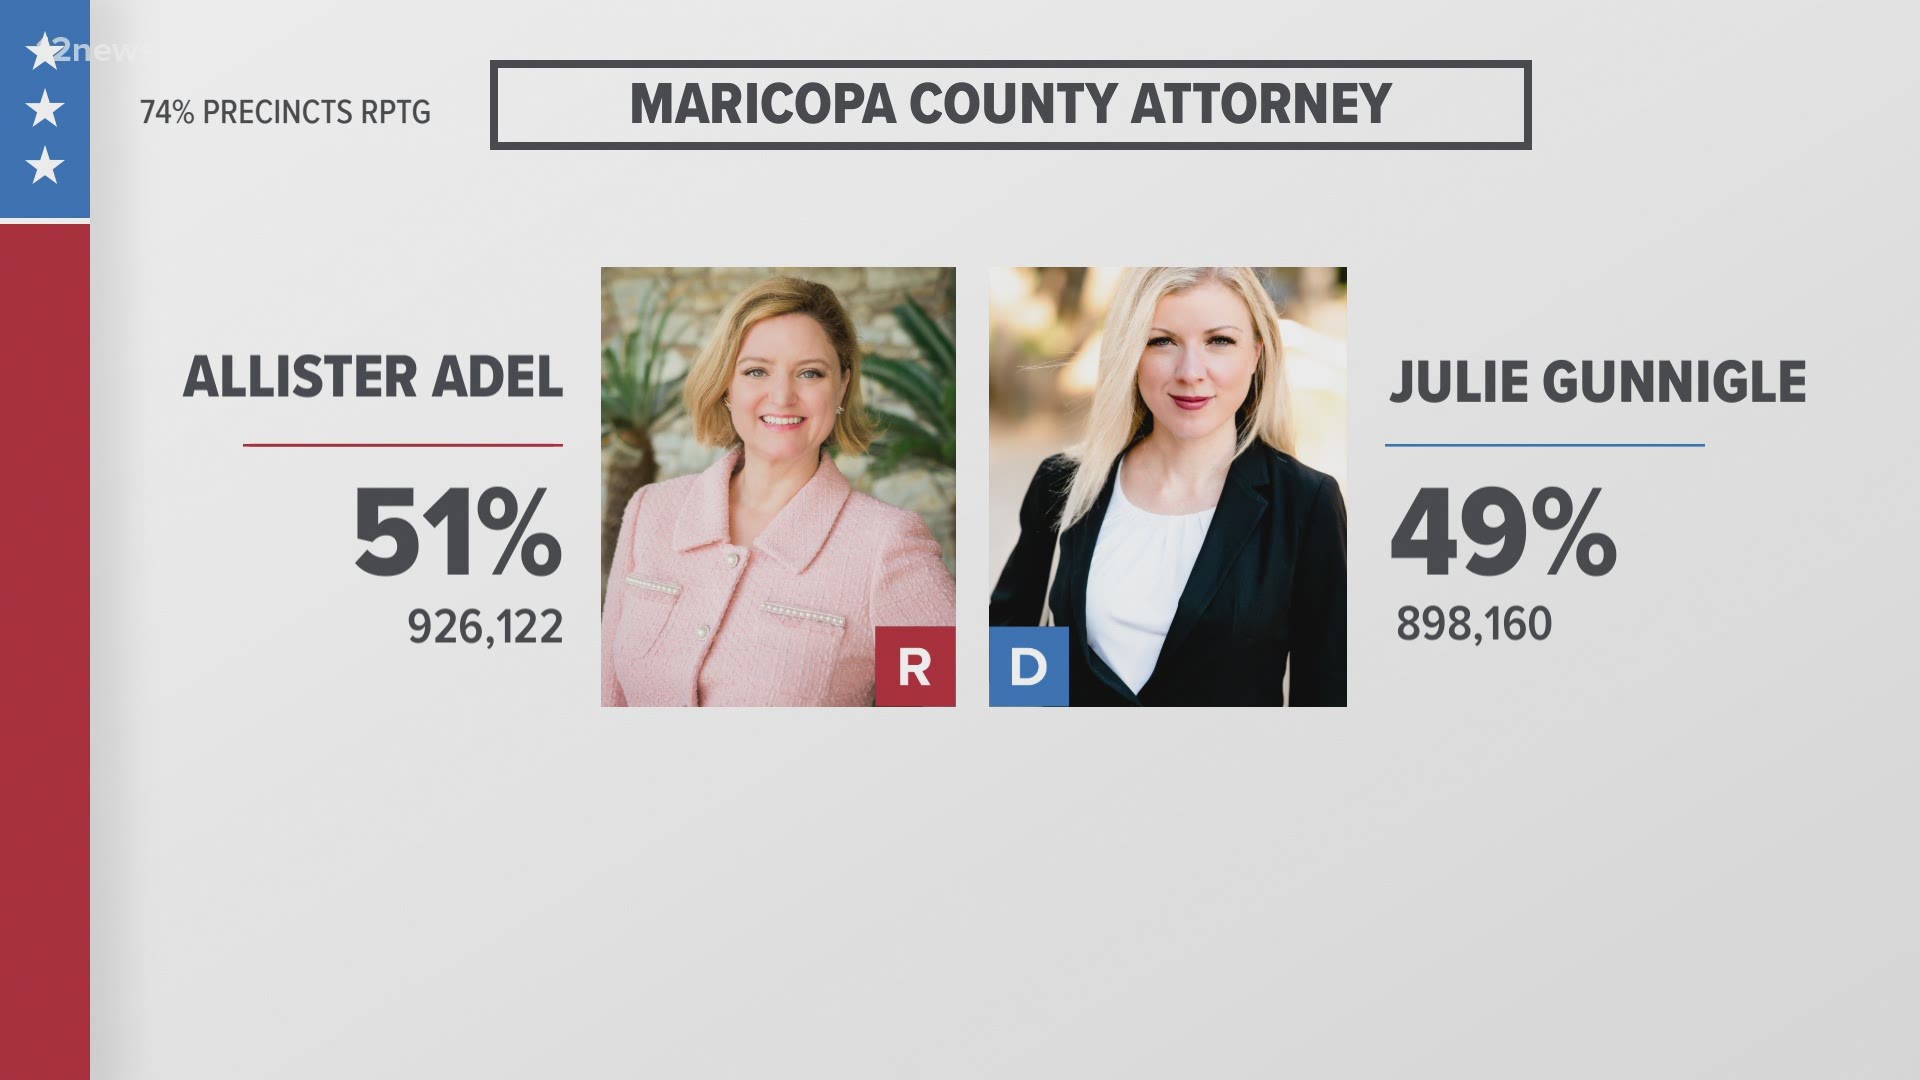 The race for Maricopa County attorney featured Republican incumbent Allister Adel and Democratic challenger Julie Gunnigle. Gunnigle has conceded the race to Adel.